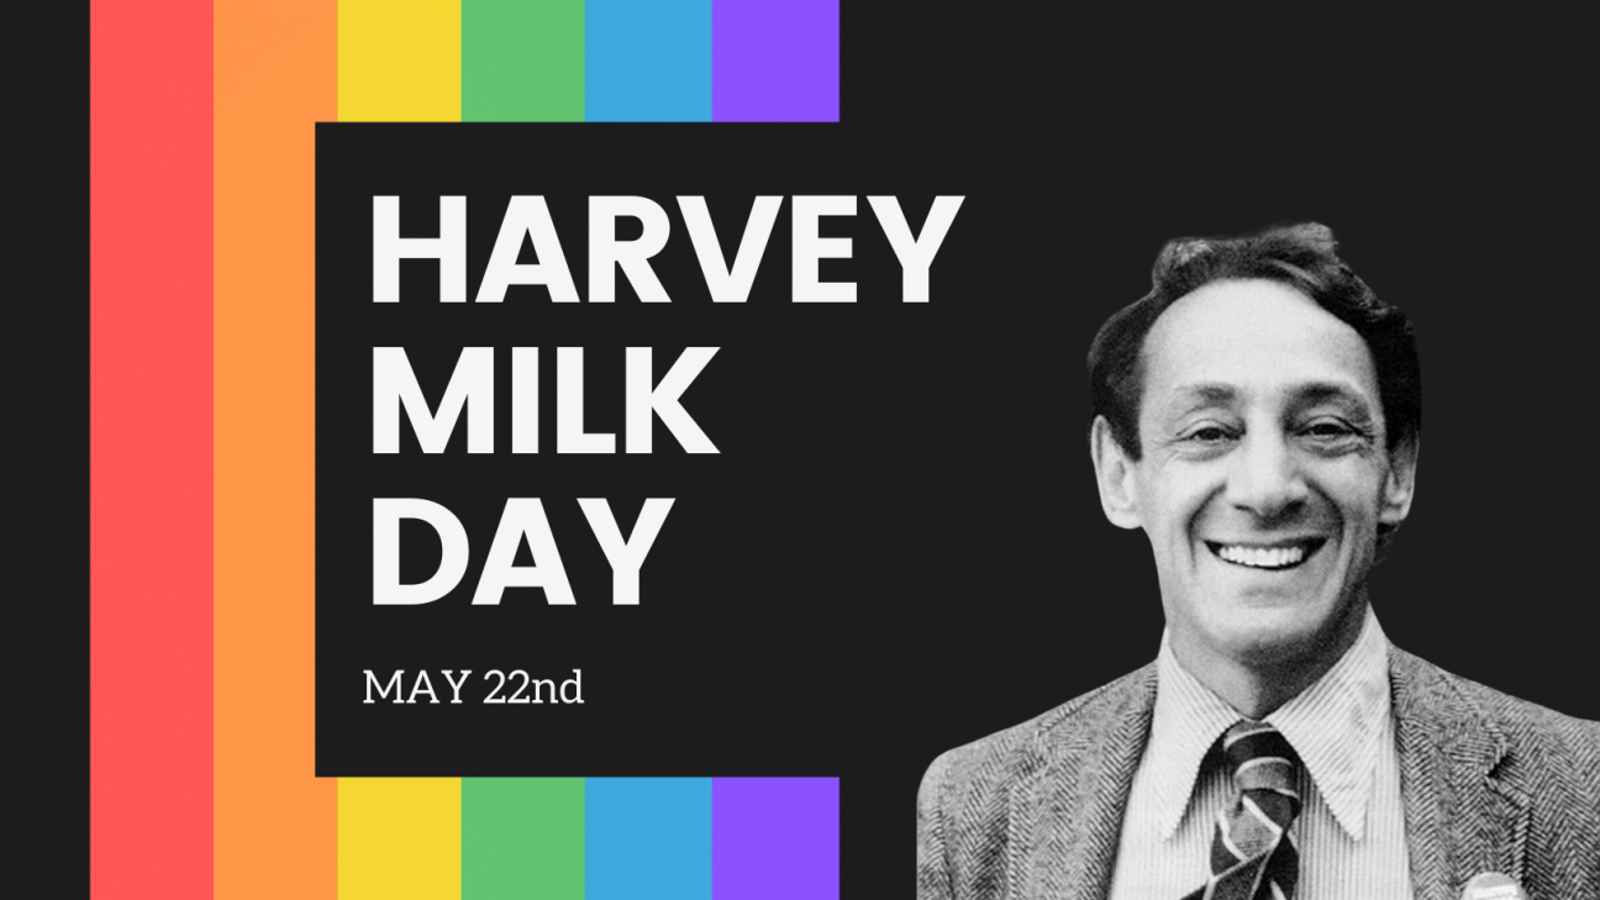 Harvey Milk Day 2023: Date, History, How to Participate in Harvey Milk Day